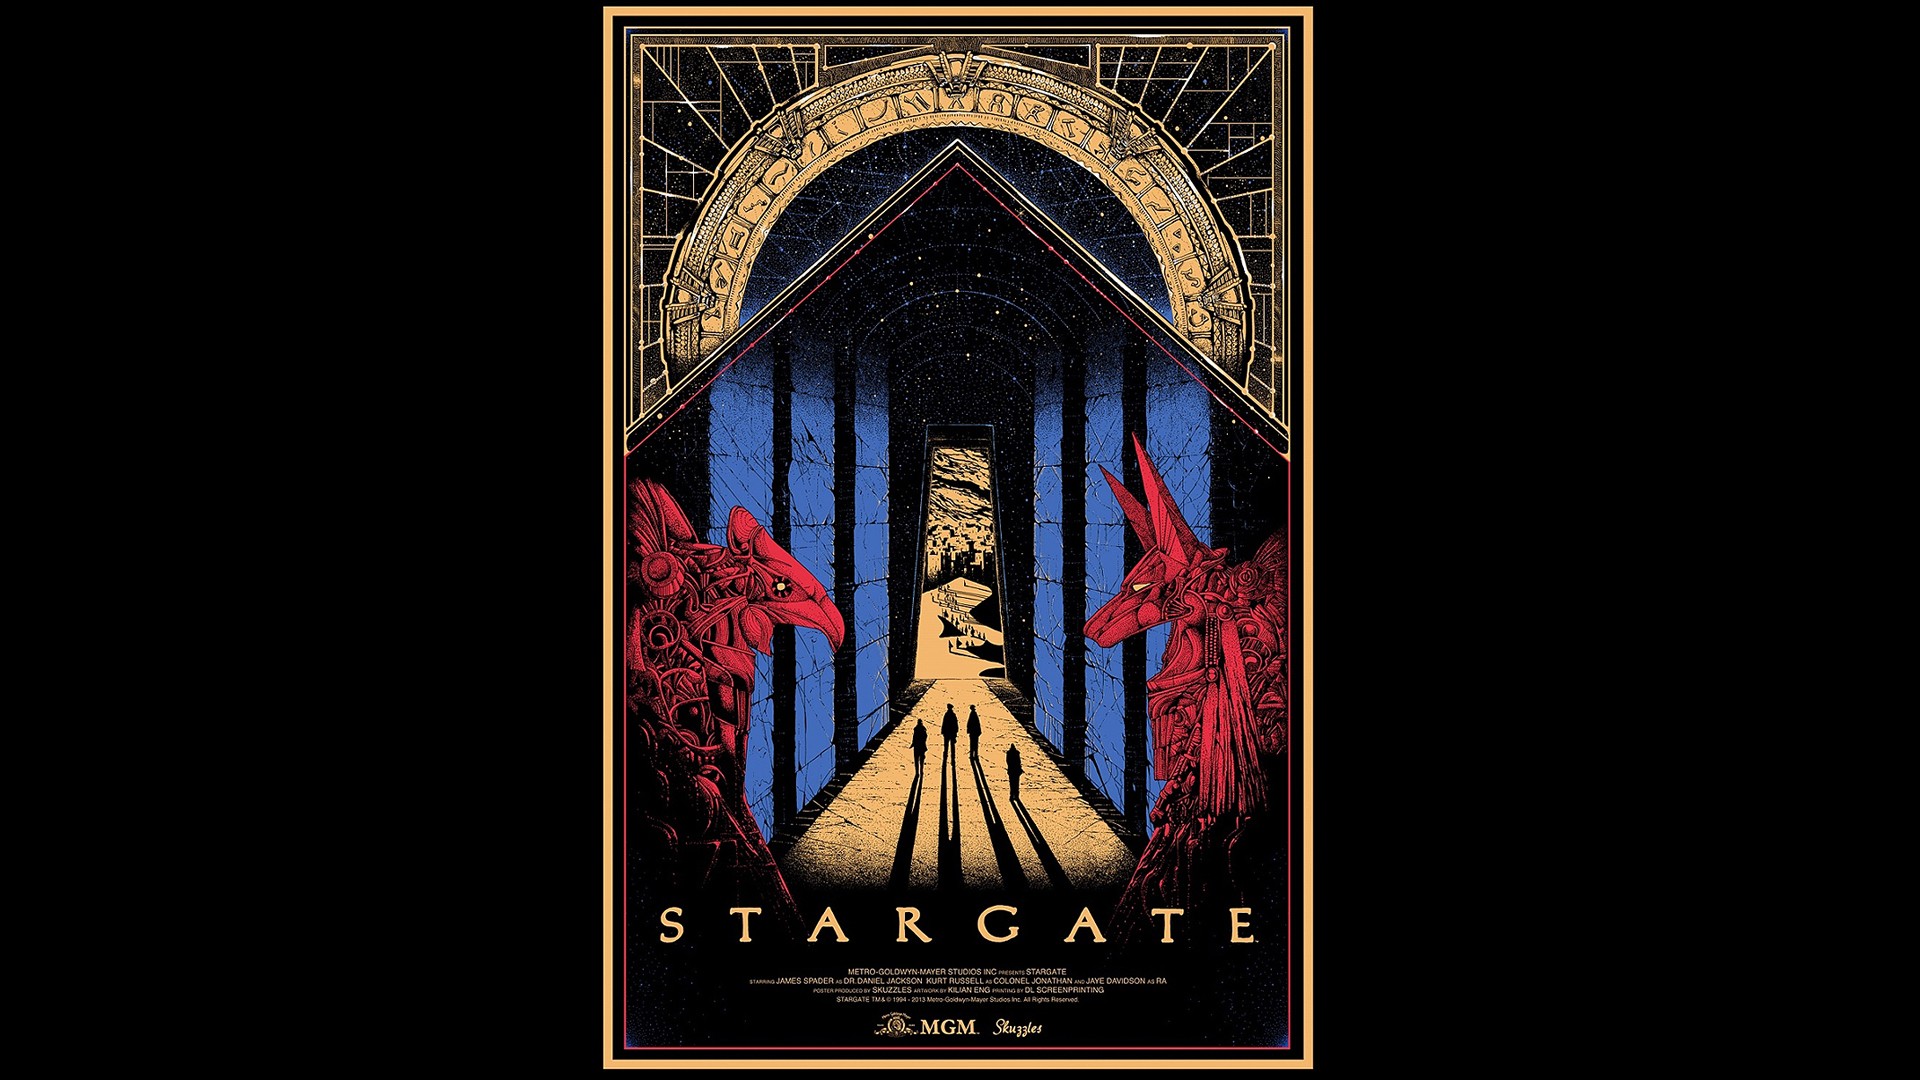 General 1920x1080 movies science fiction fan art Stargate movie poster